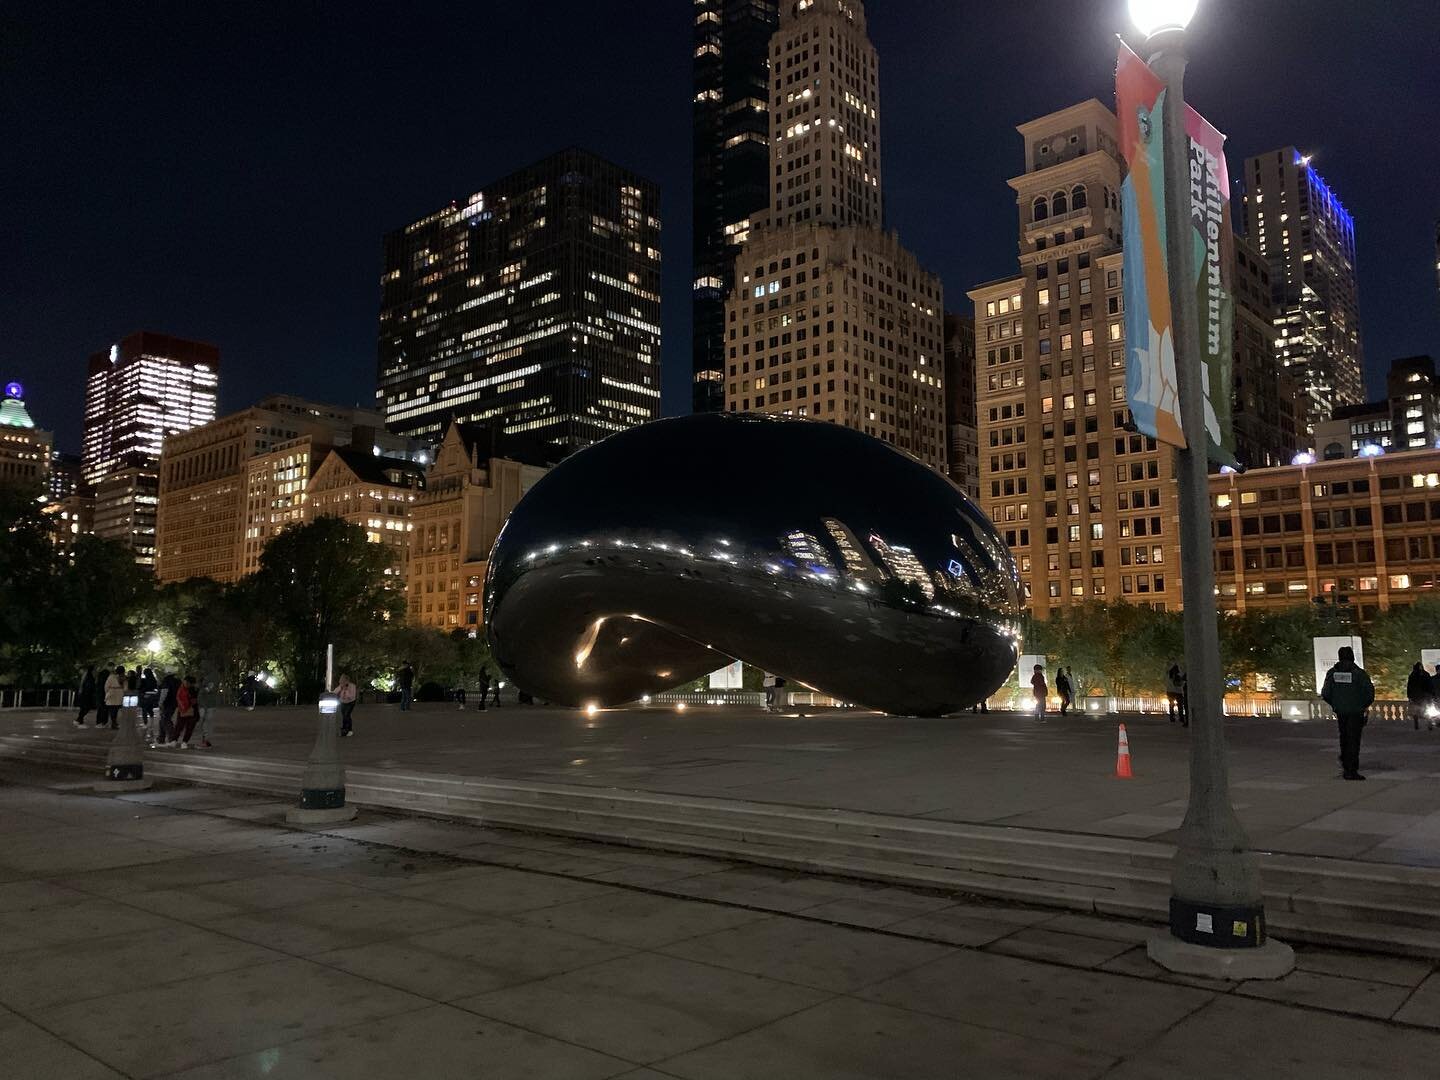 For me, I really like the bean!